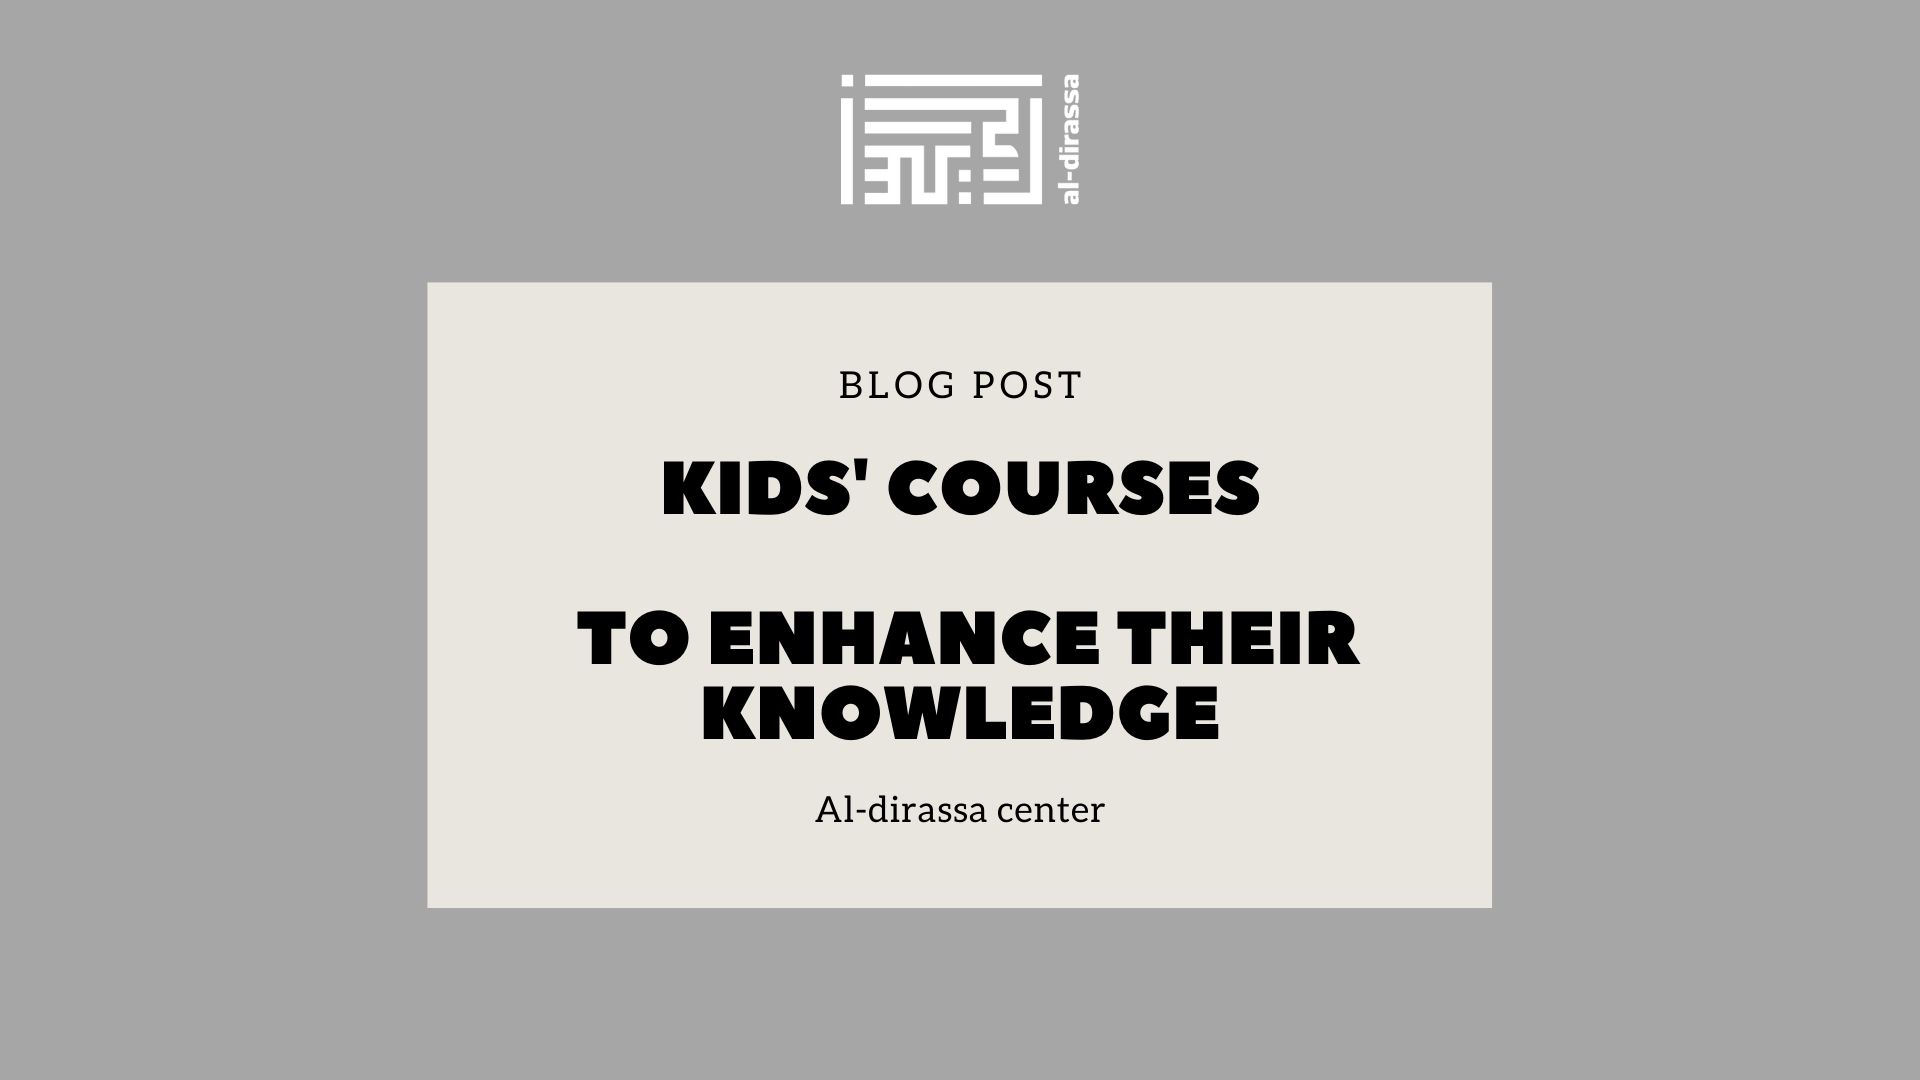 Kids' courses to enhance their knowledge